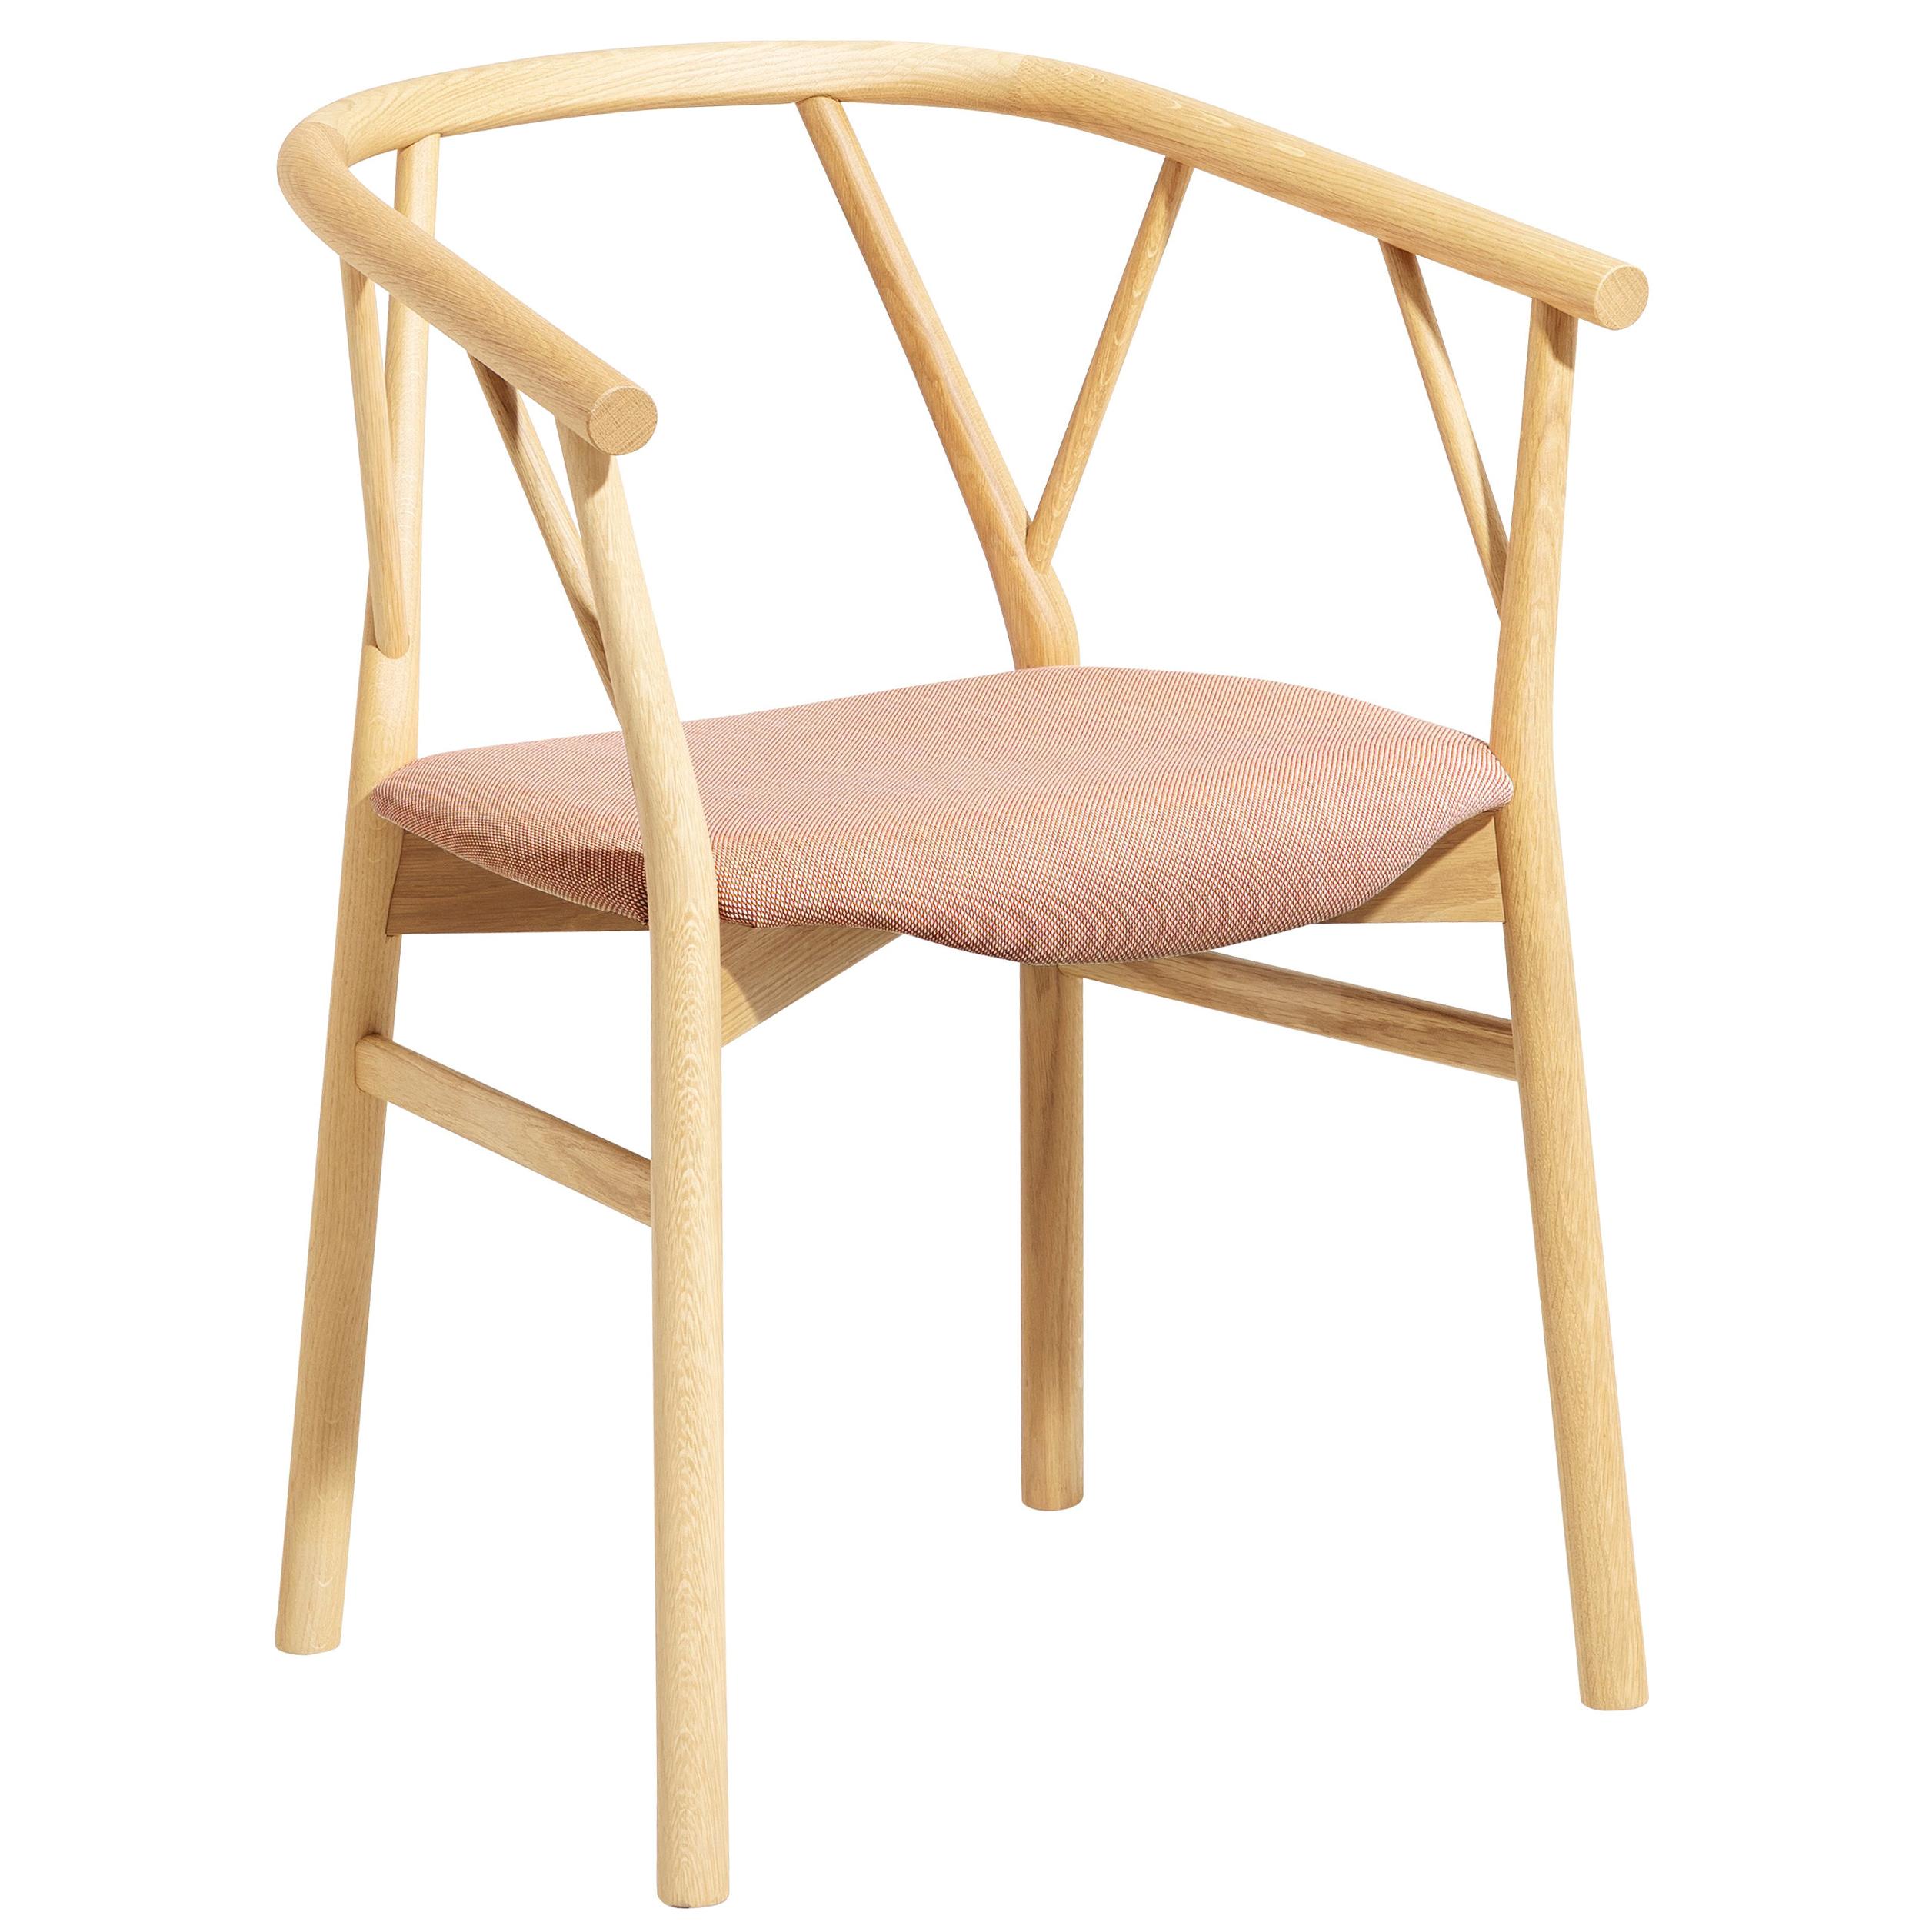 Valerie Armchair with Coral Seat and Wood Base, by Giopato & Coombes